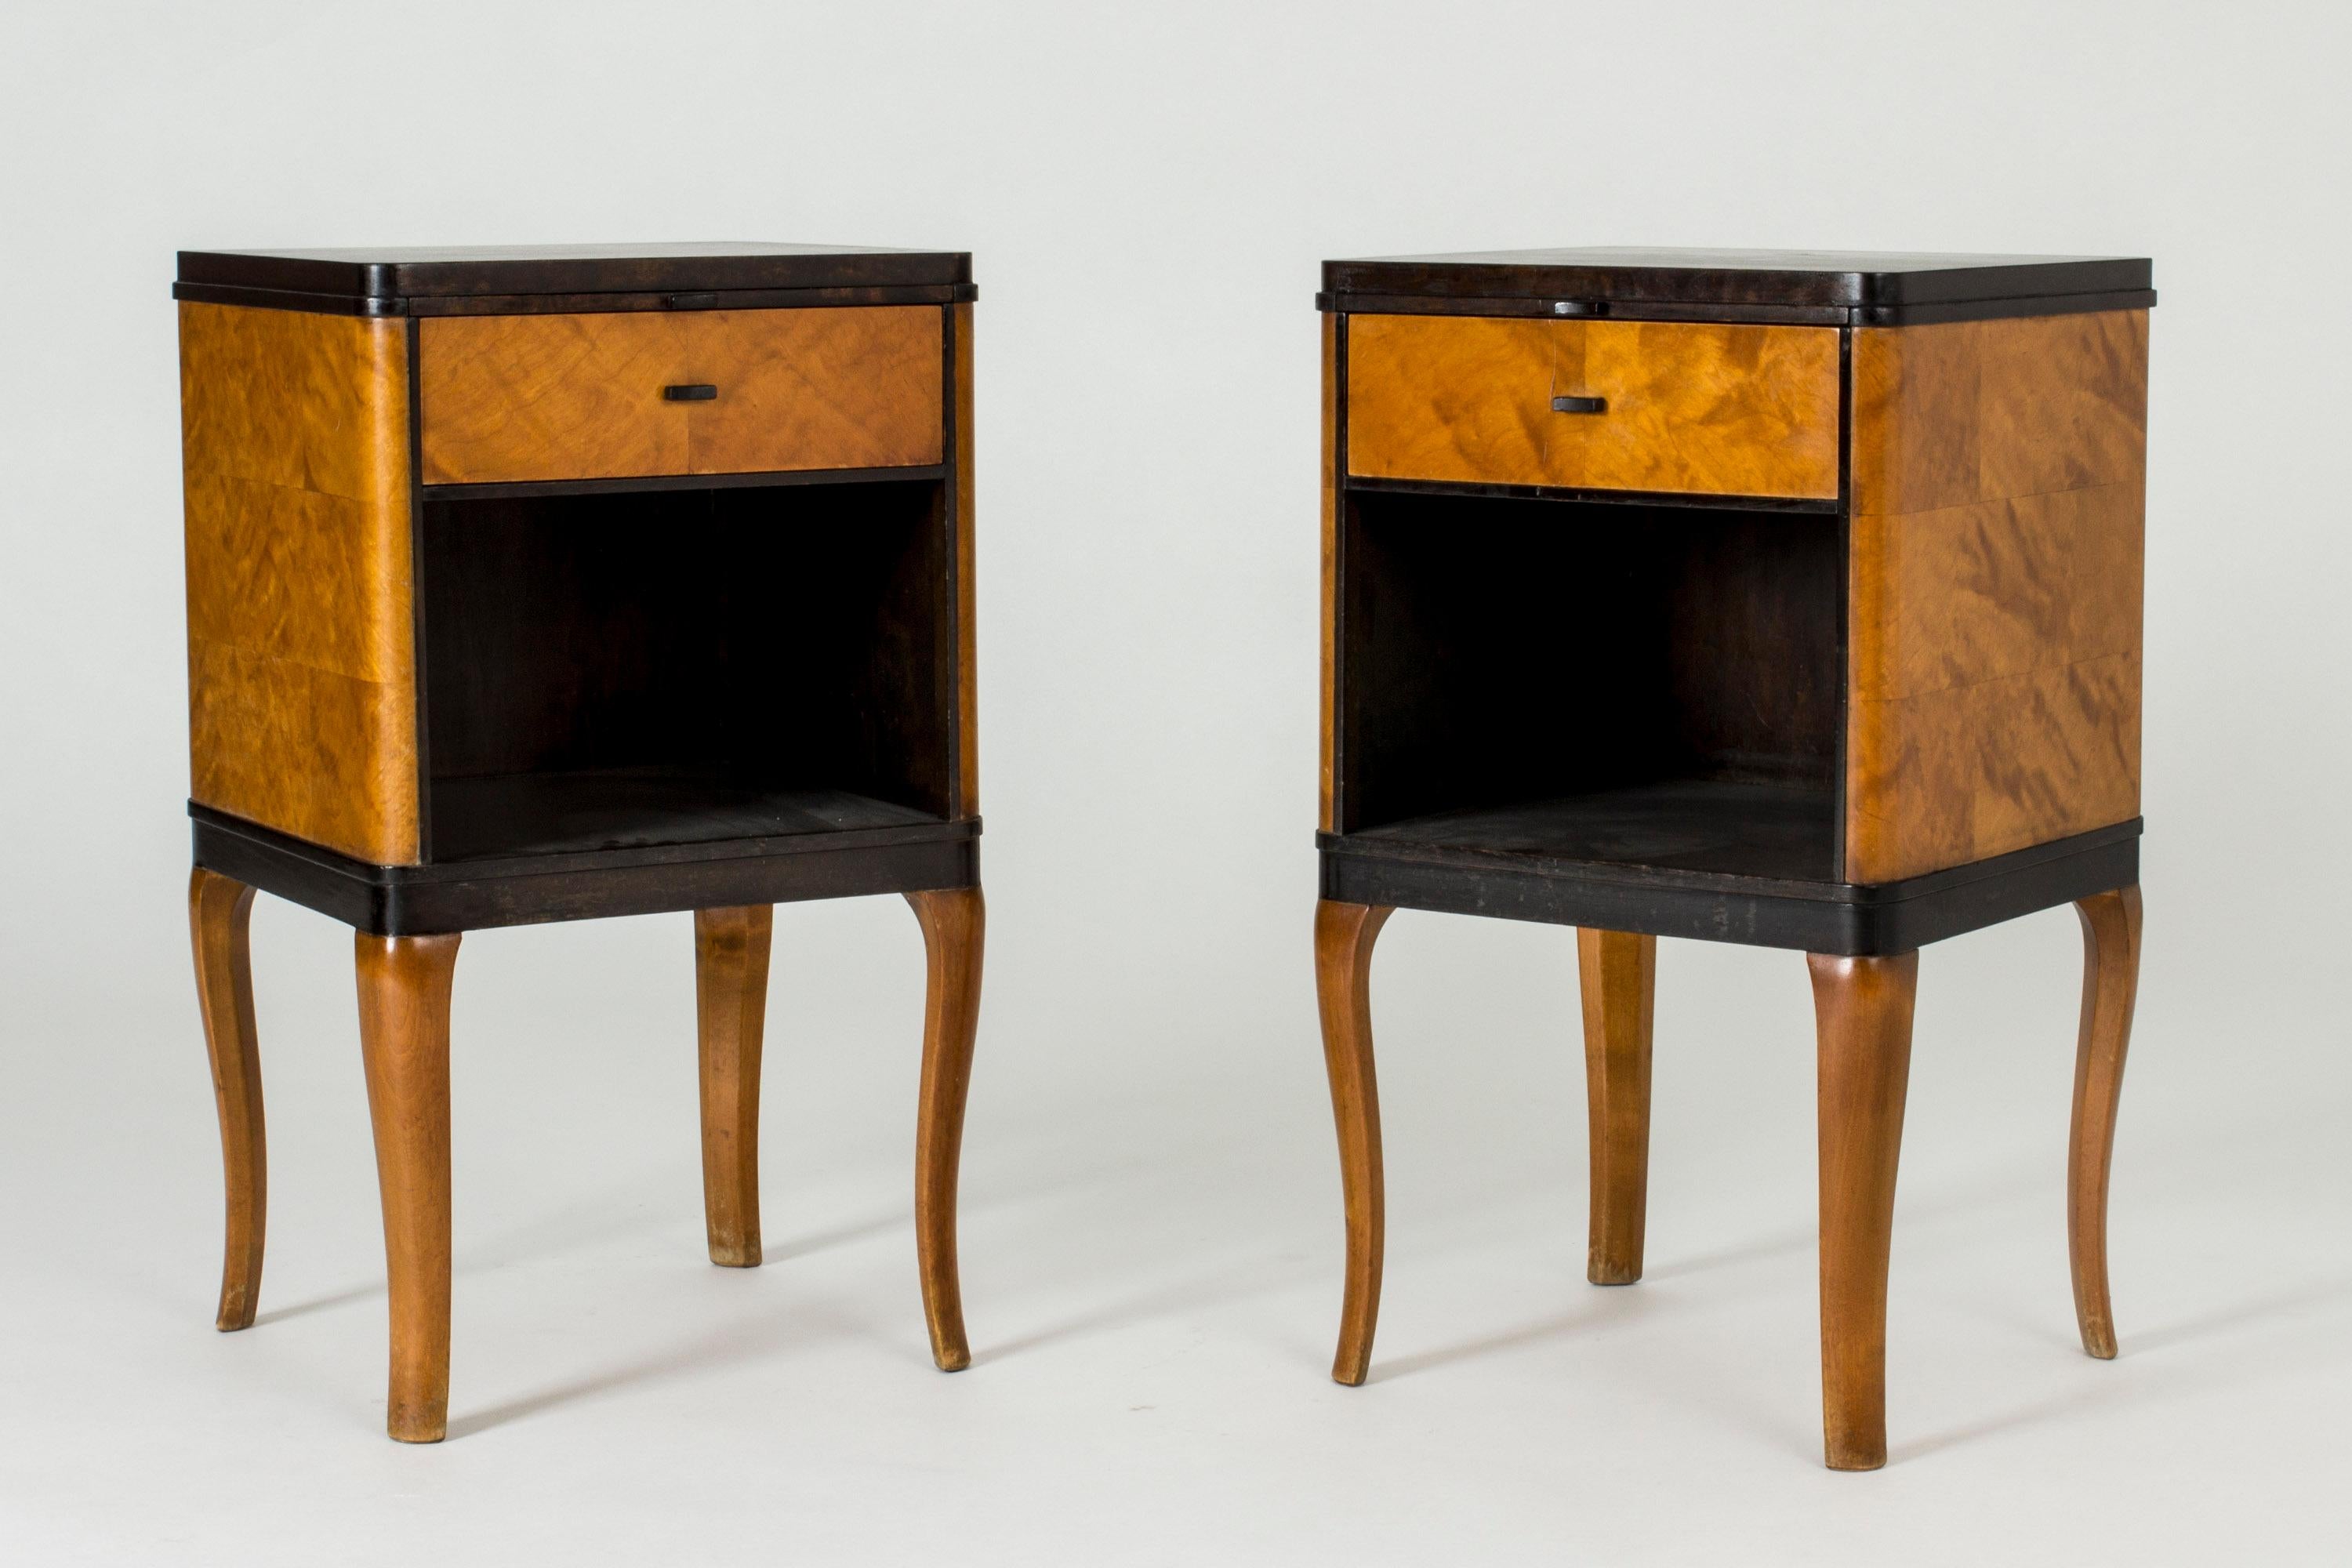 Pair of beautiful bedside tables by Carl Malmsten, model named “Haga”. Made in alder root and stained birch. On the sides the wood is laid in a checkered pattern. Curved legs connoting neo-classisim.